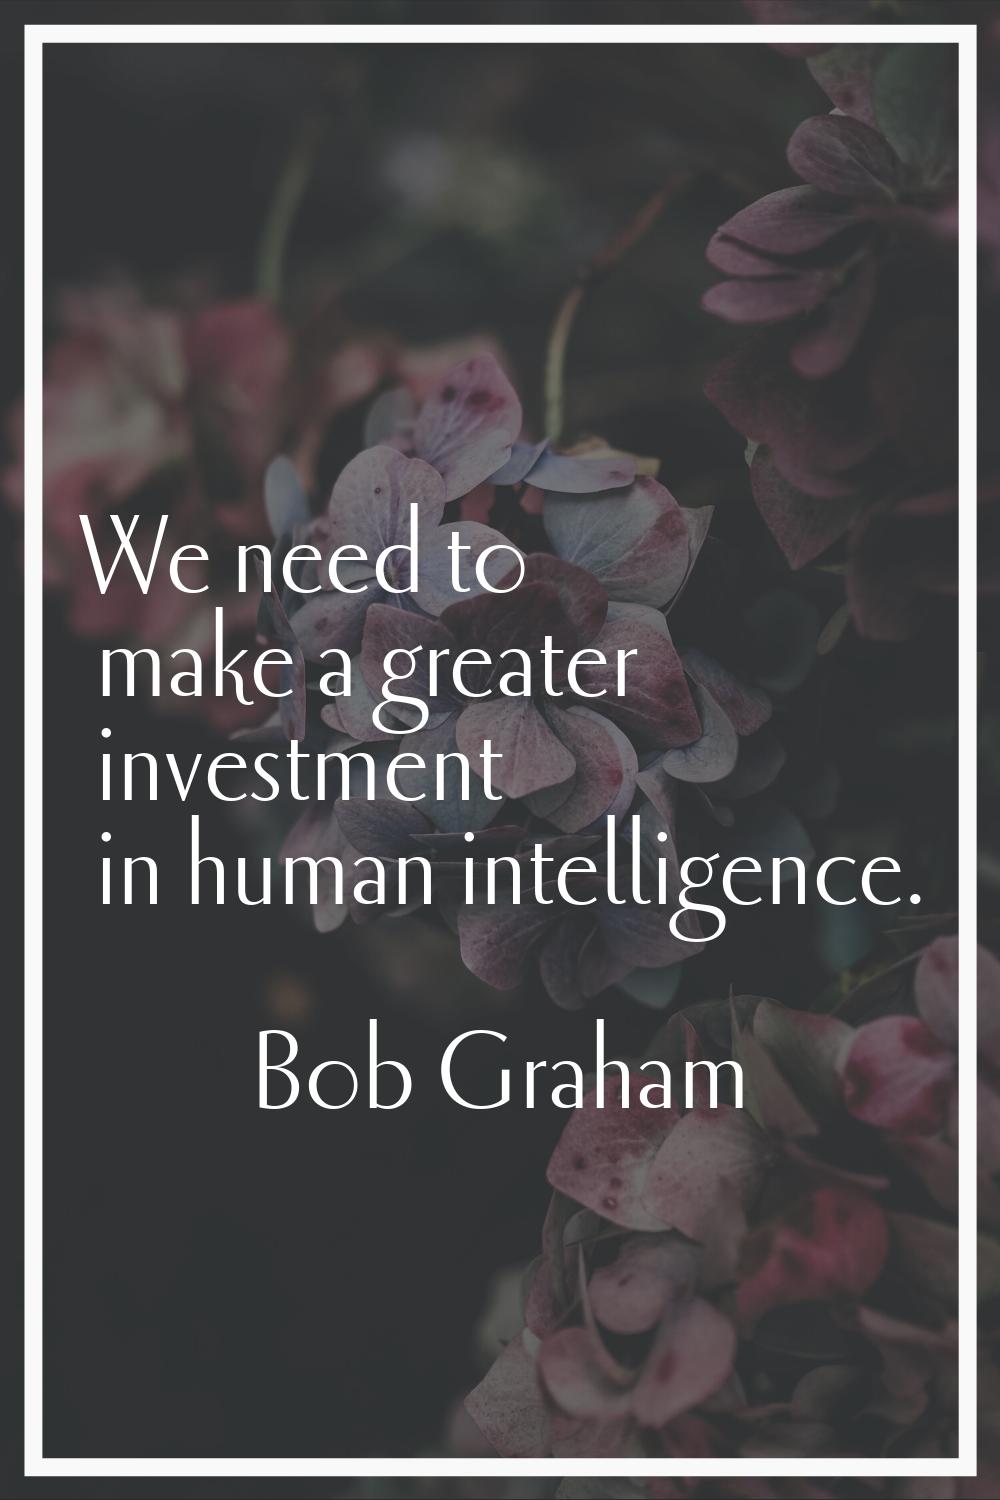 We need to make a greater investment in human intelligence.